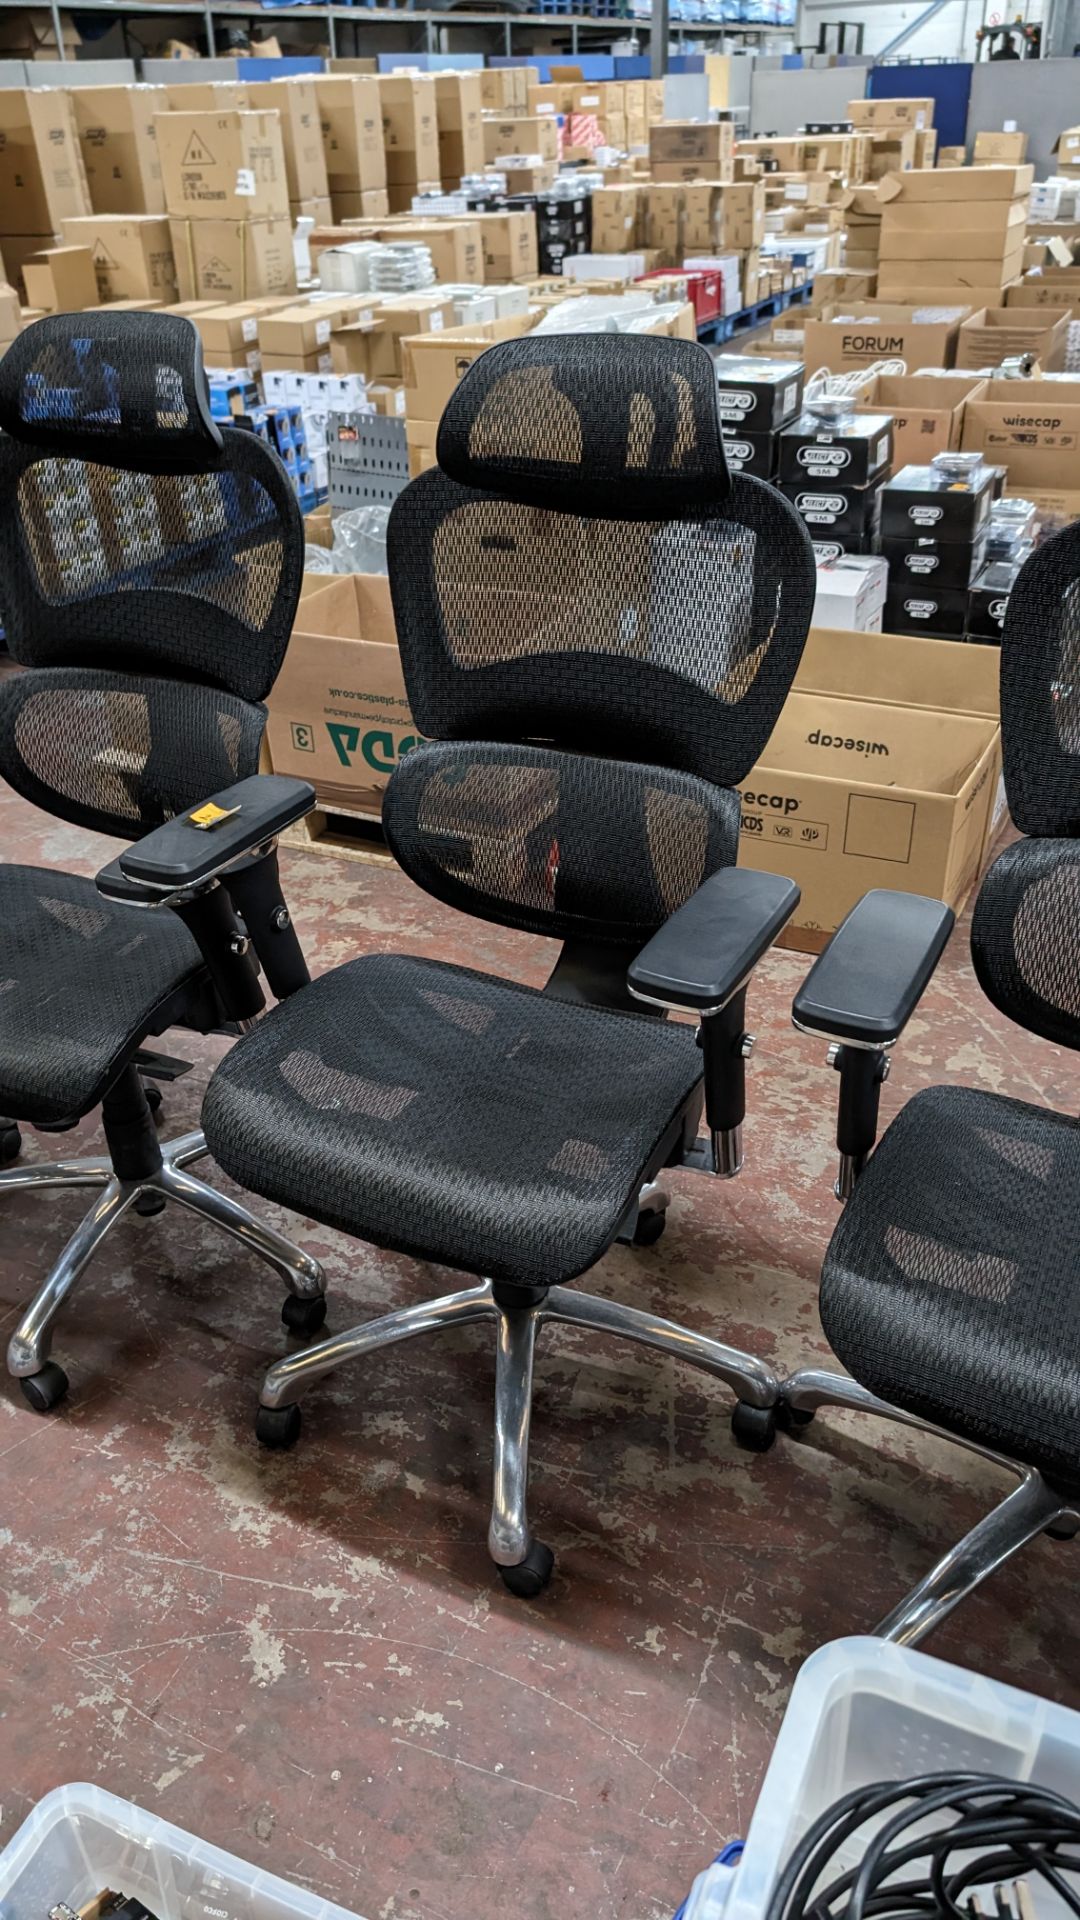 4 off black mesh fabric and chrome modern chairs with arms and headrests. NB: The chairs in lot 24 - Image 3 of 6